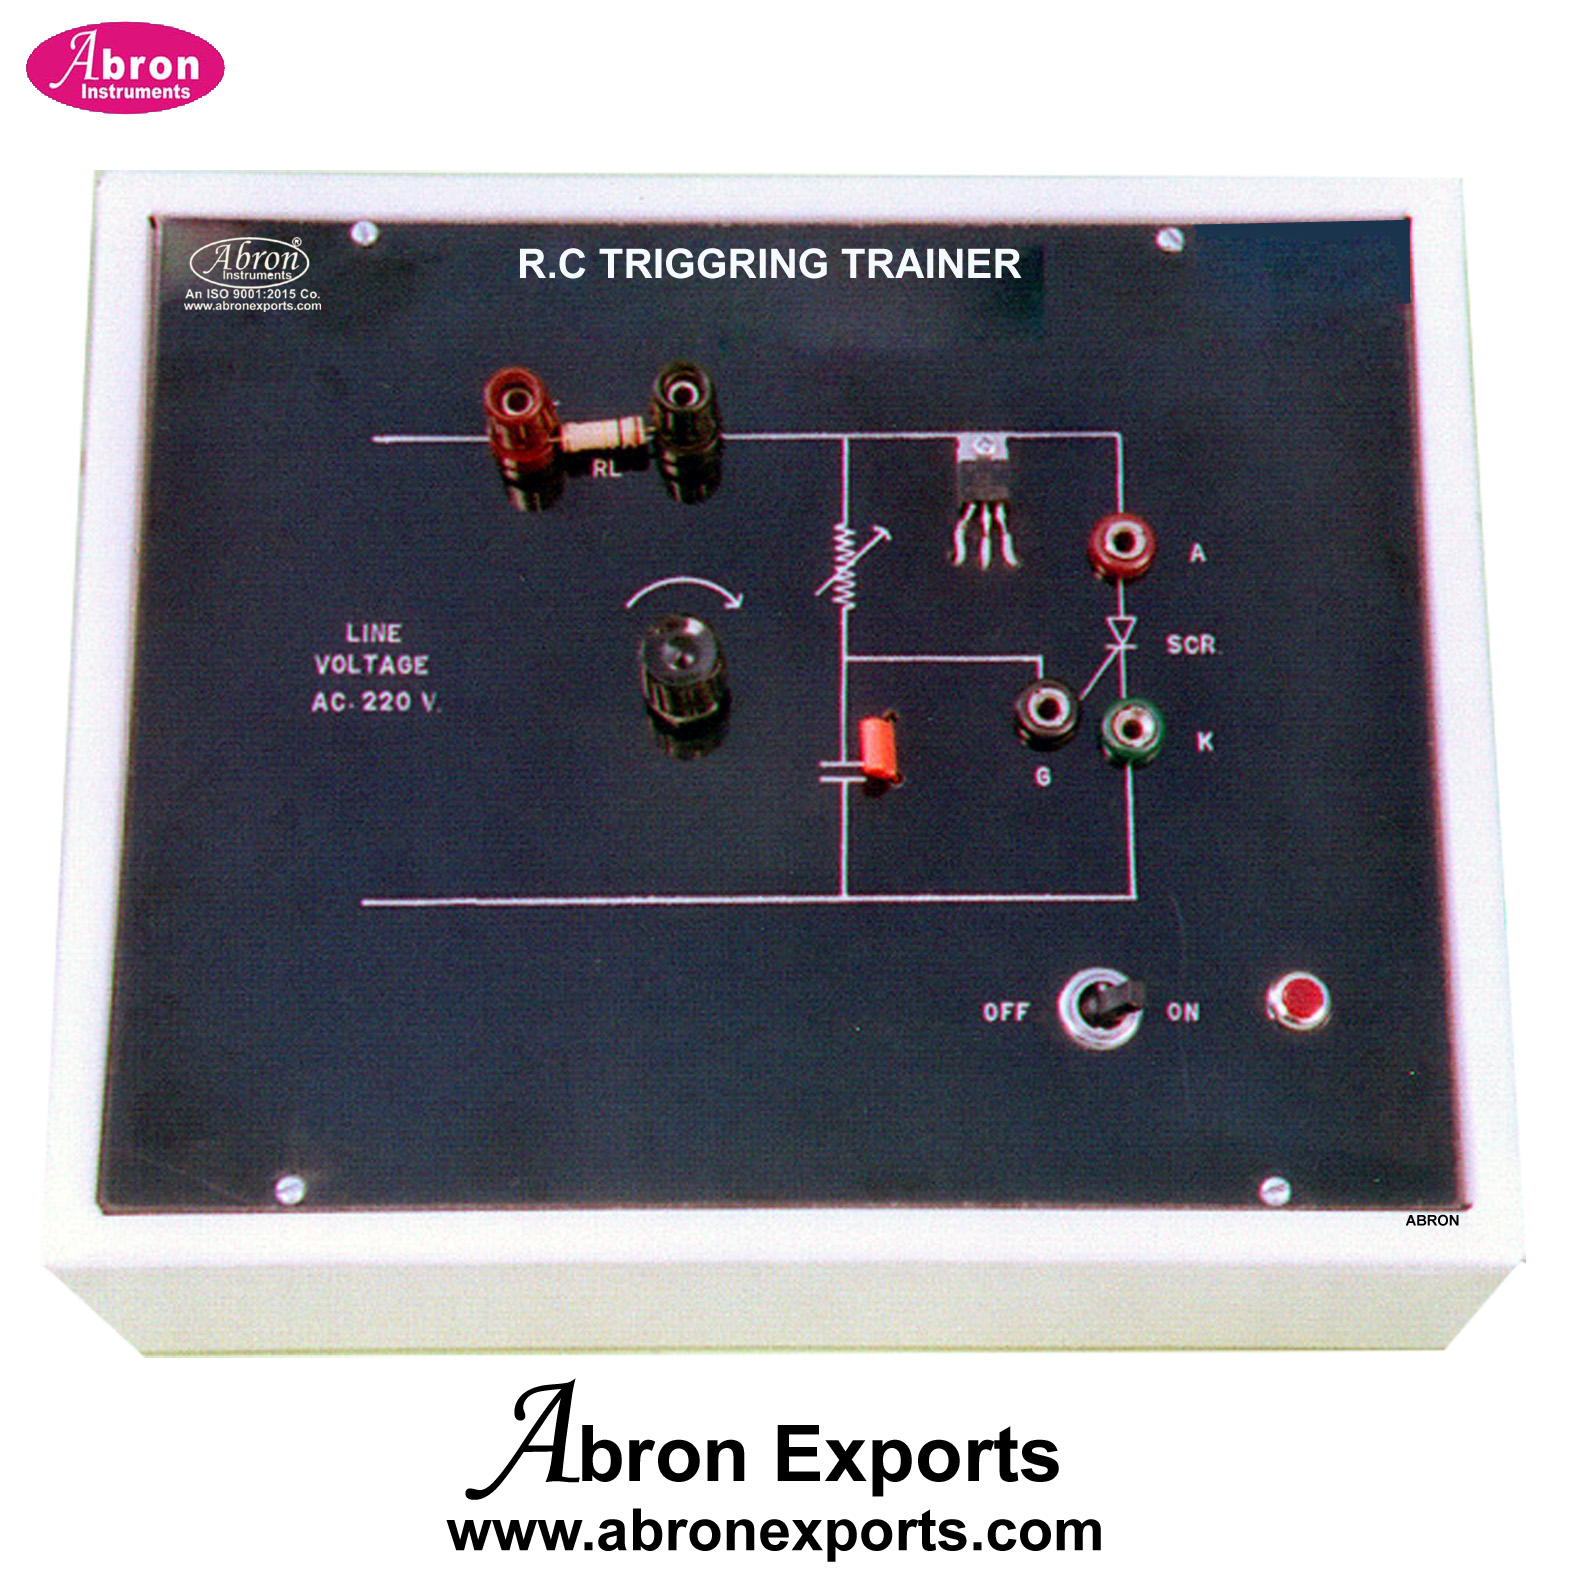 ETB Study of RC Triggring Trainer Output to Study on CRO Training Board Supply Abron AE-1258RCT 